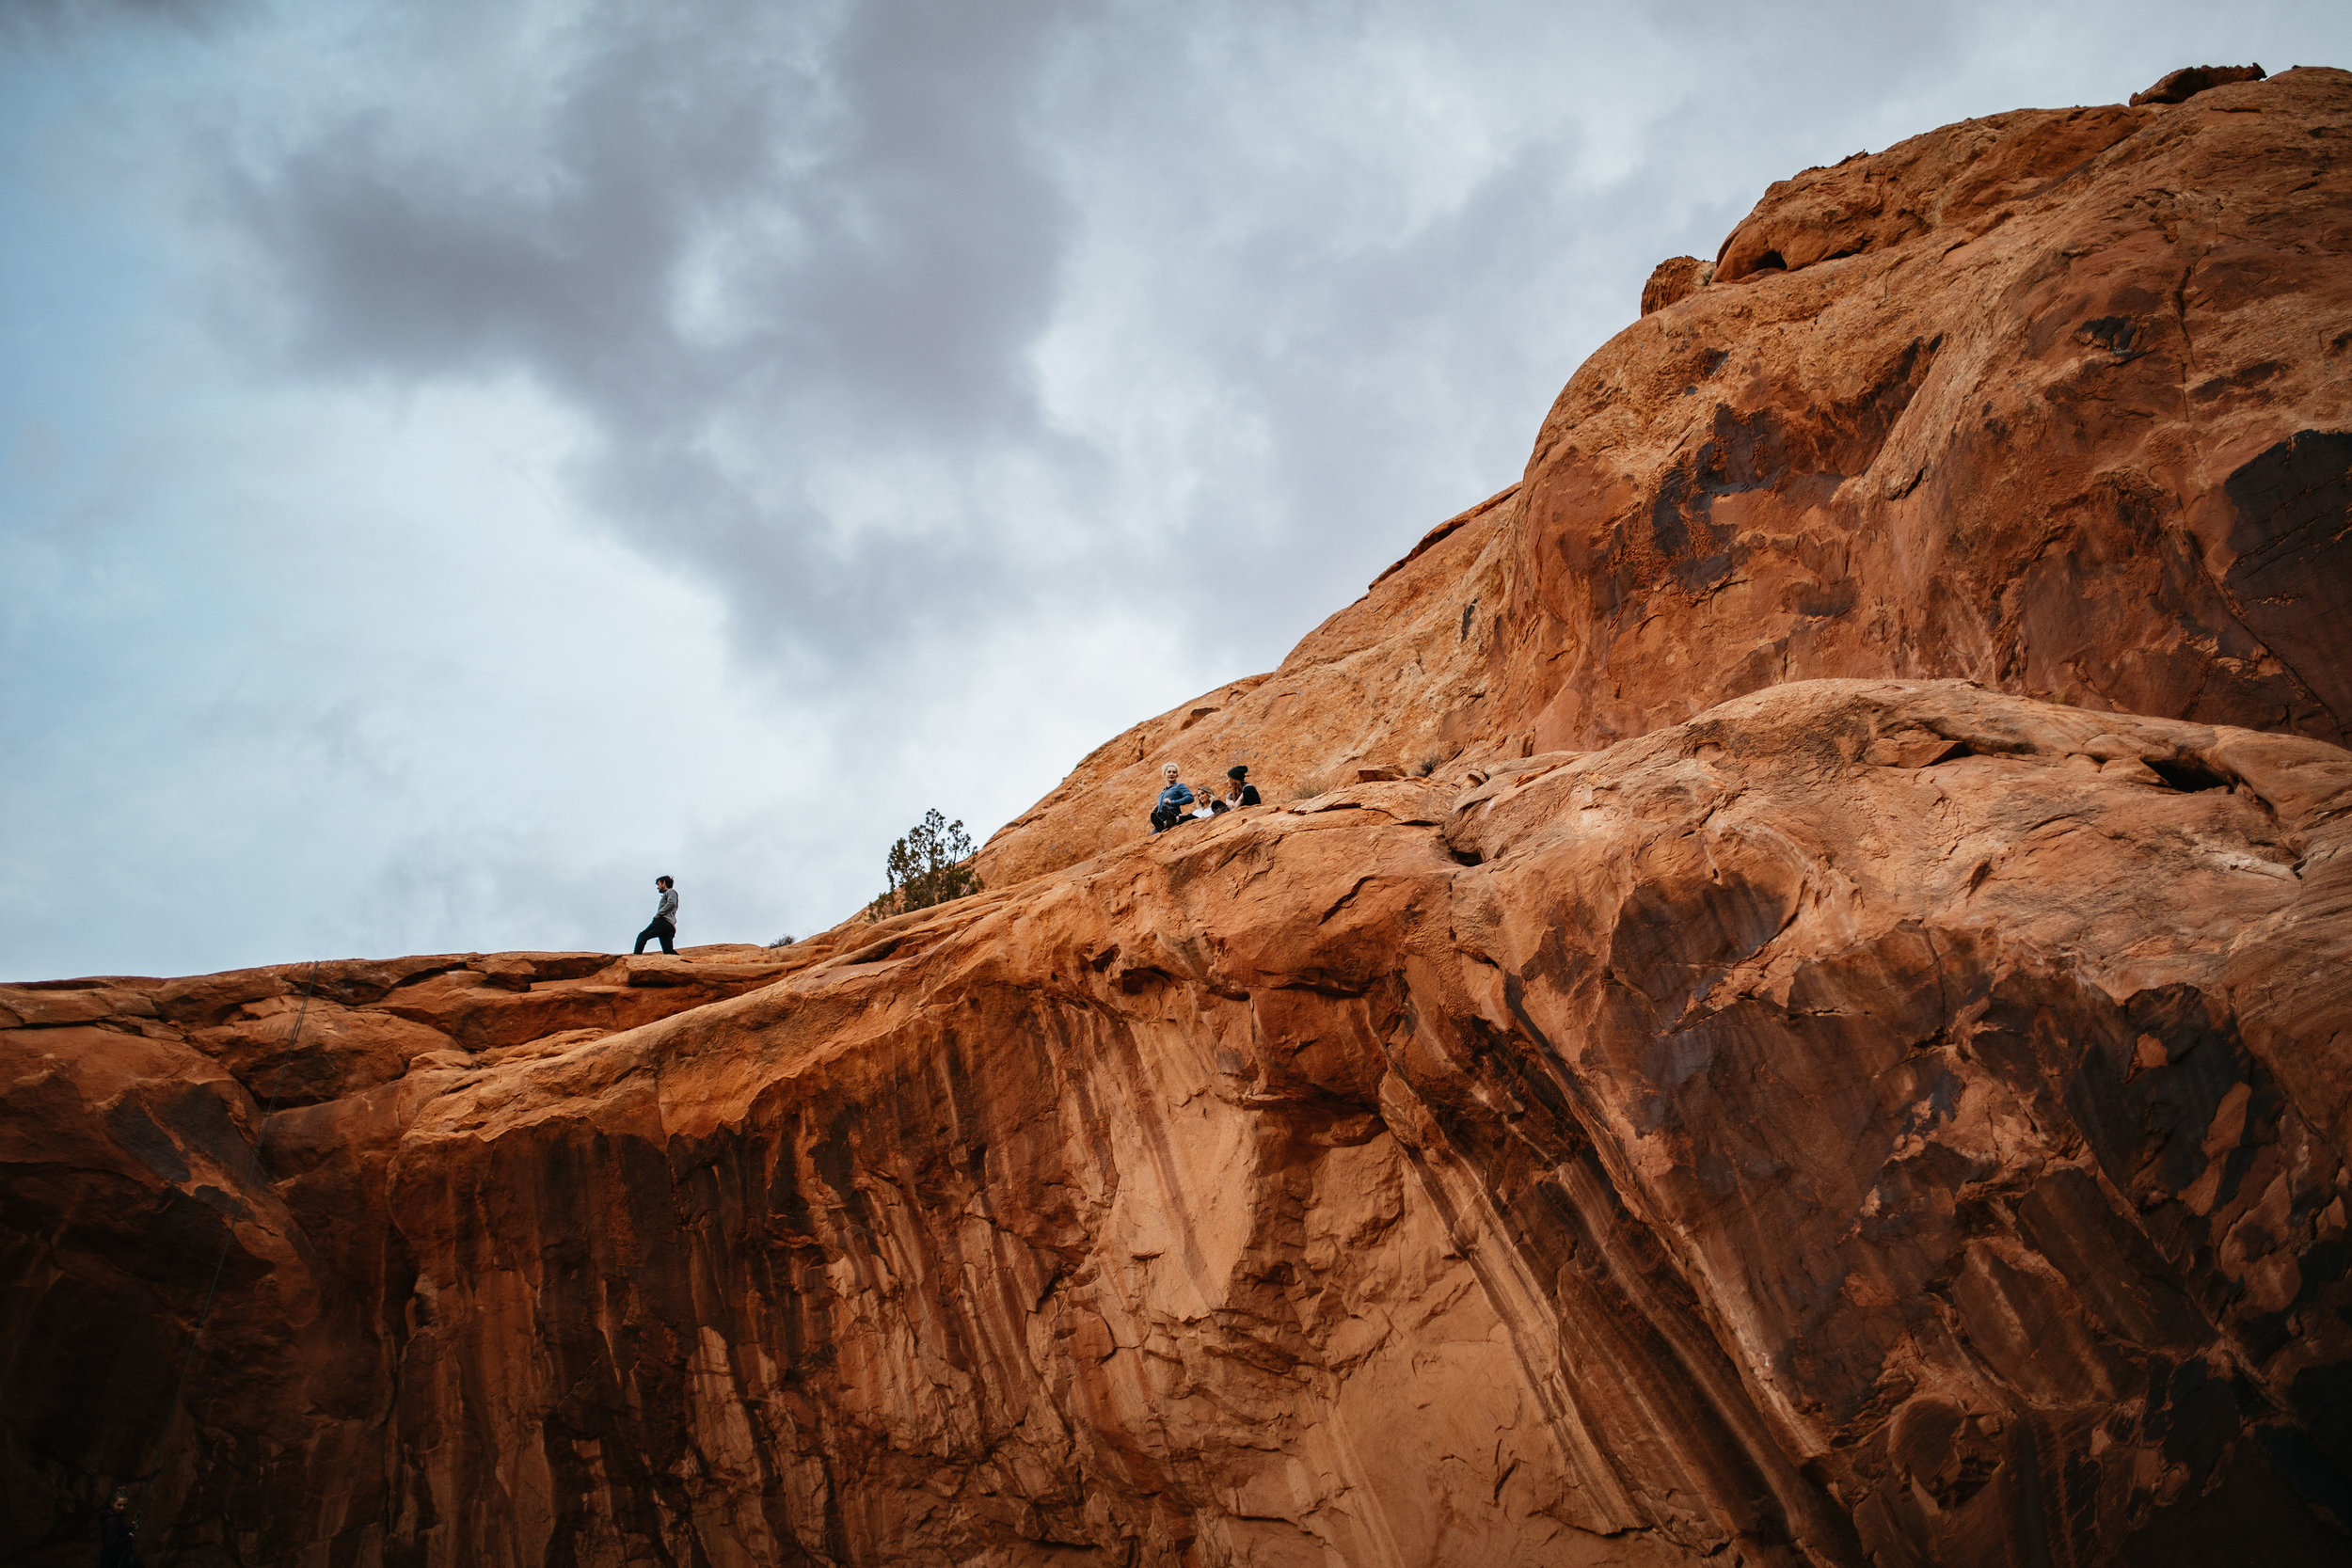 Sitting on a cliff in Moab, Utah